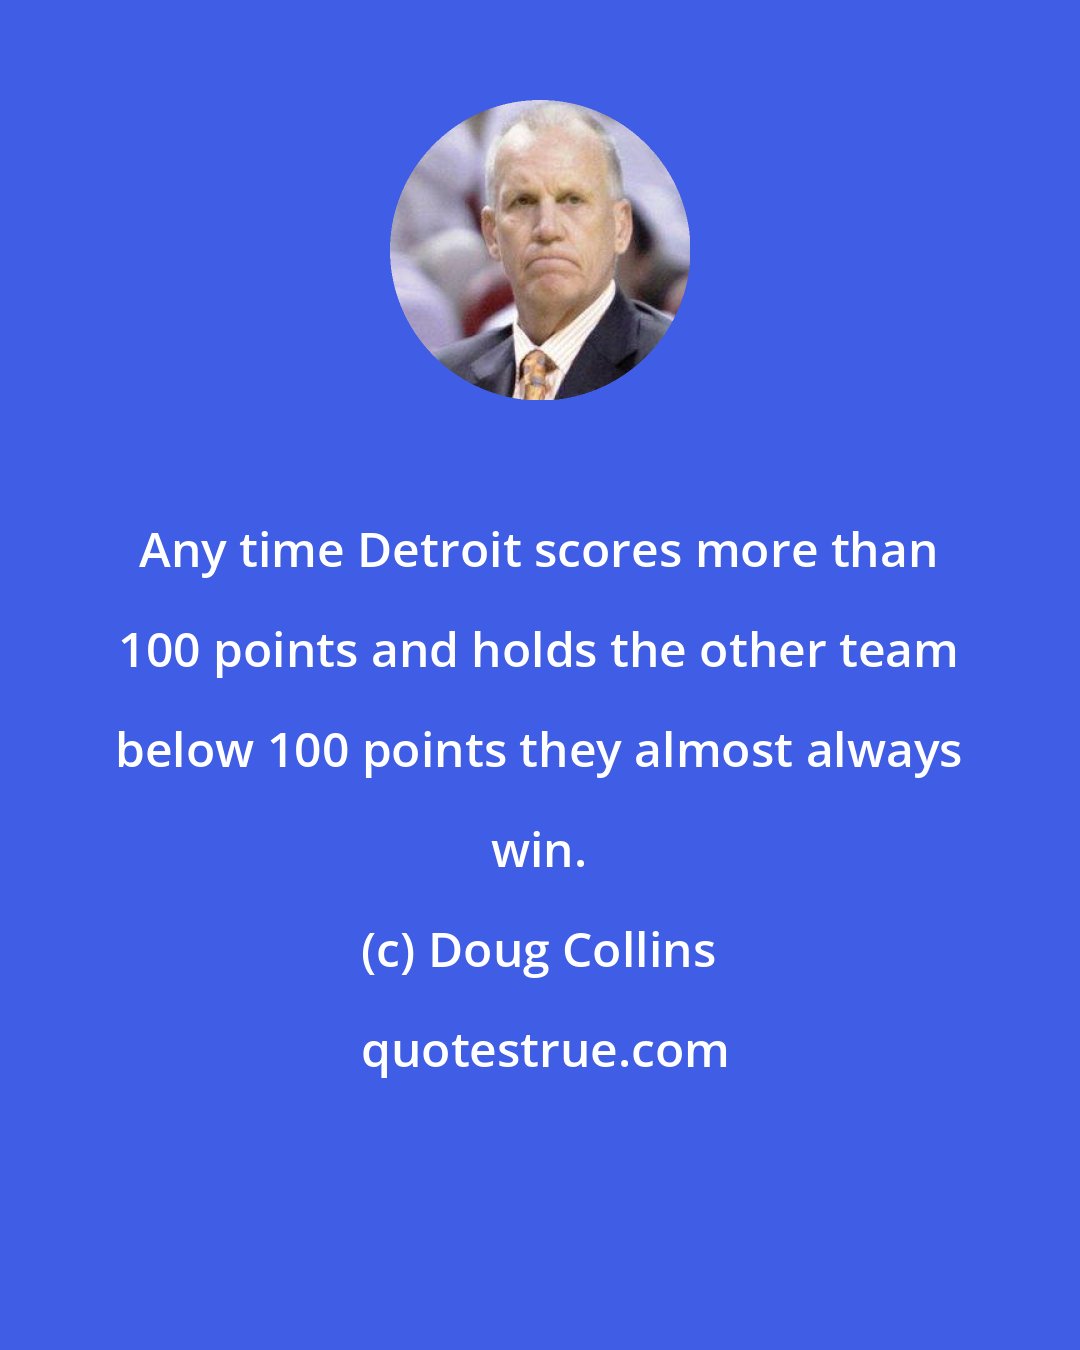 Doug Collins: Any time Detroit scores more than 100 points and holds the other team below 100 points they almost always win.